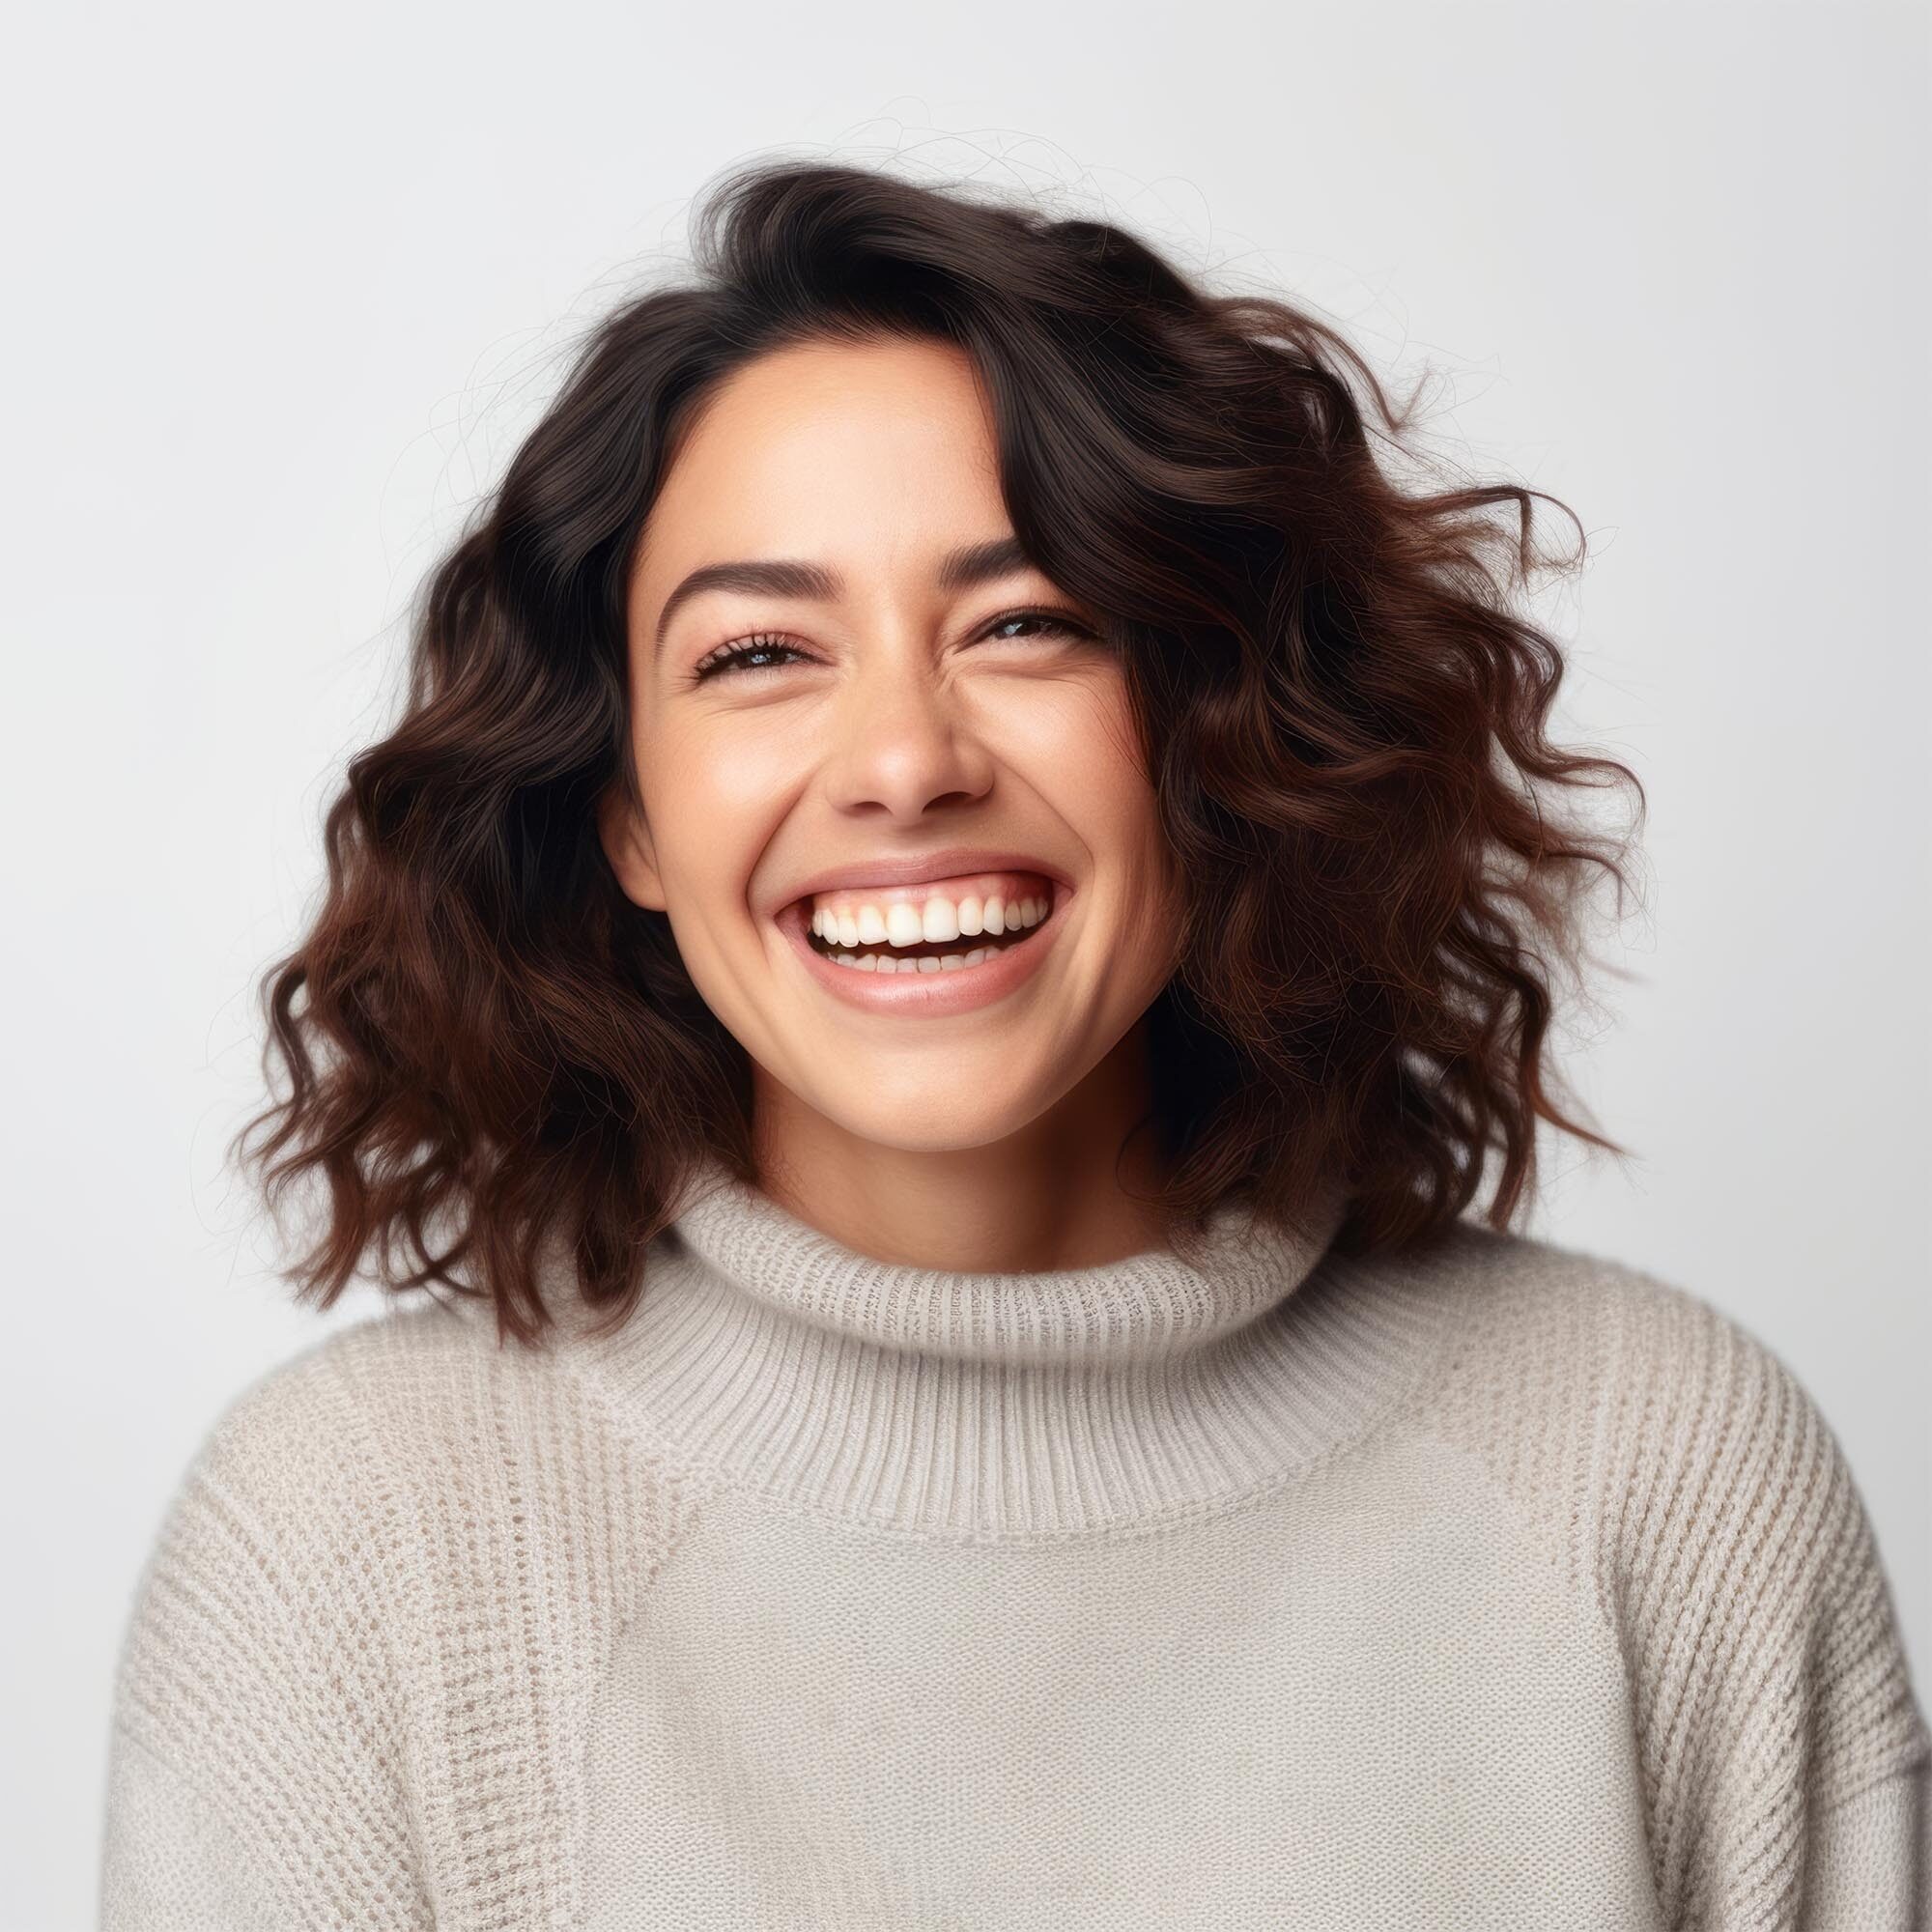 Joyful woman with curly hair laughing heartily, wearing a cozy turtleneck sweater on a light background."